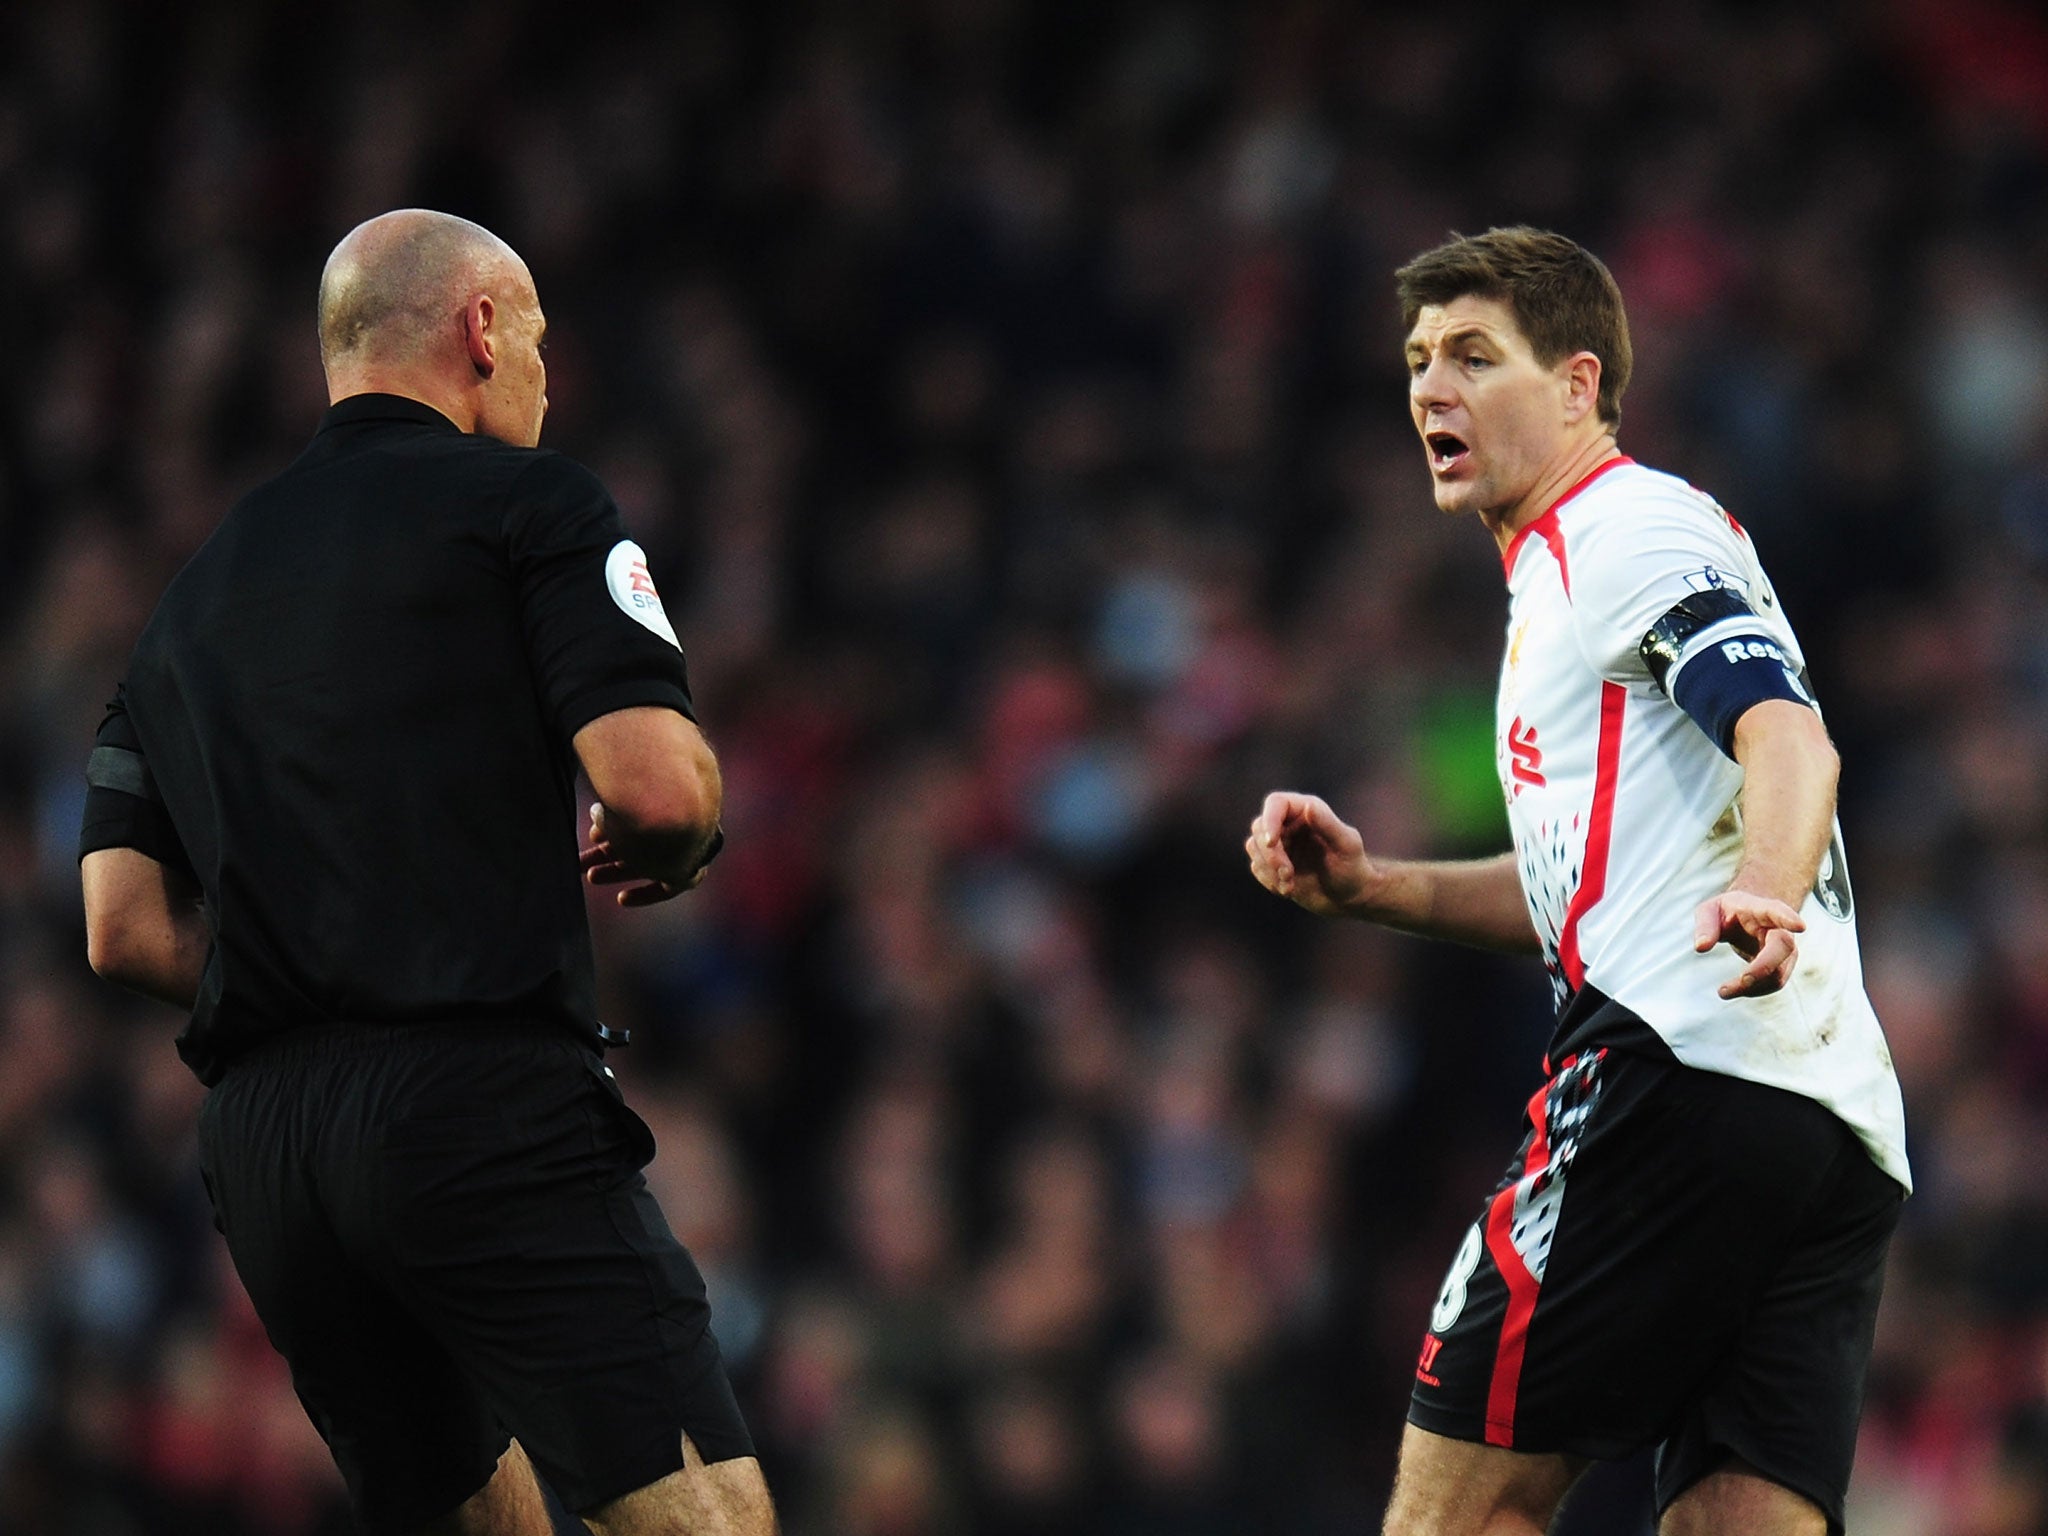 Steven Gerrard protests to referee Howard Webb over his failure to award a penalty for Alex Oxlade-Chamberlain's challenge on Luis Suarez